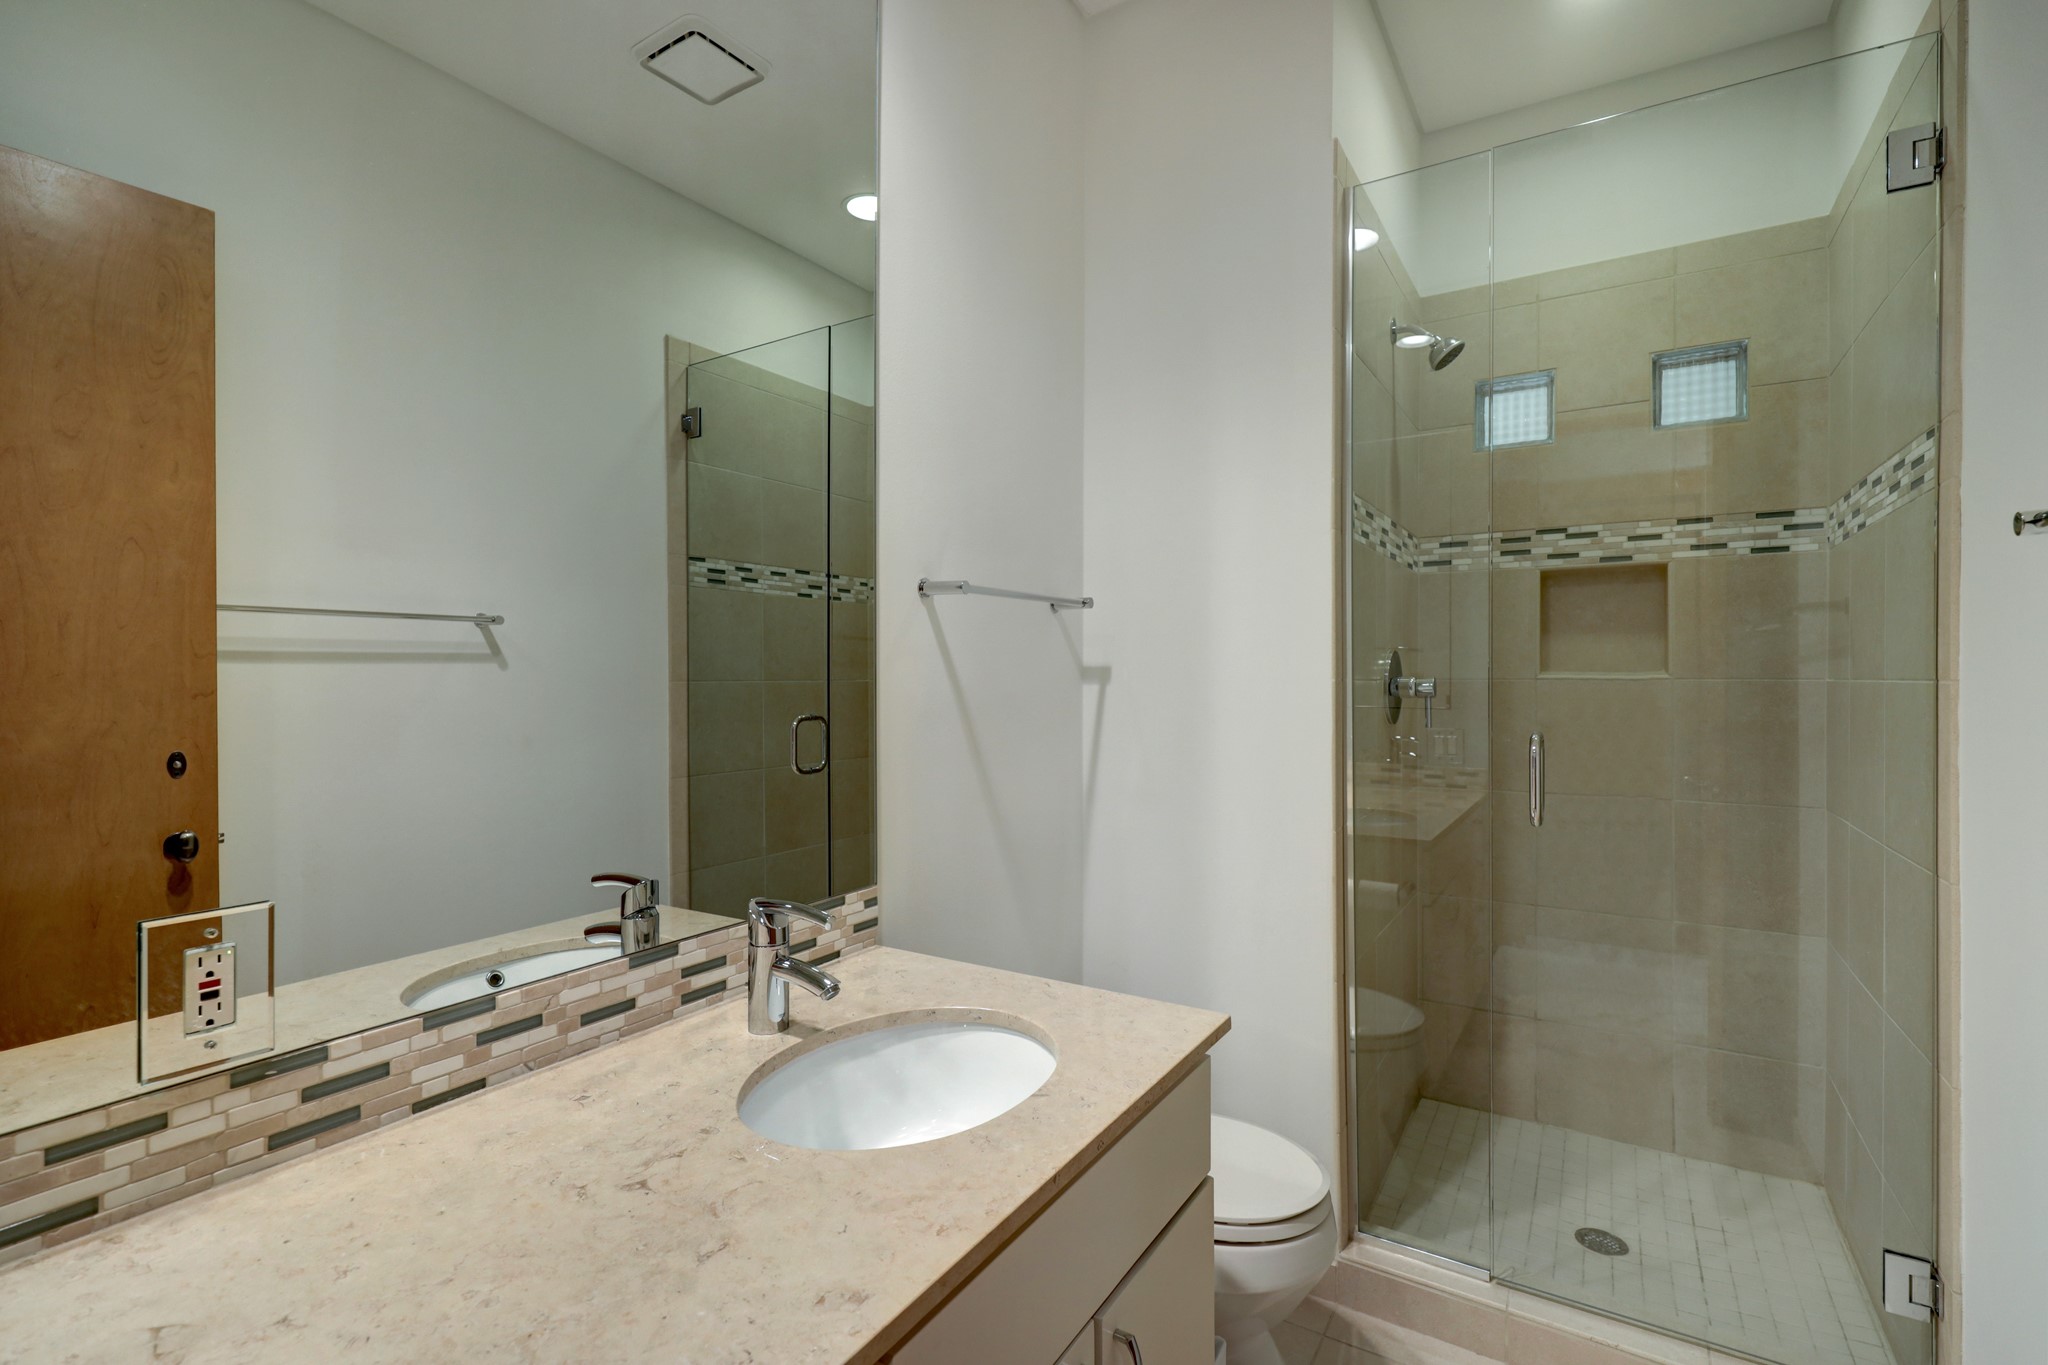 Third bedroom bathroom offers a large counter with undermount sink, a walk in shower with glass enclosure.